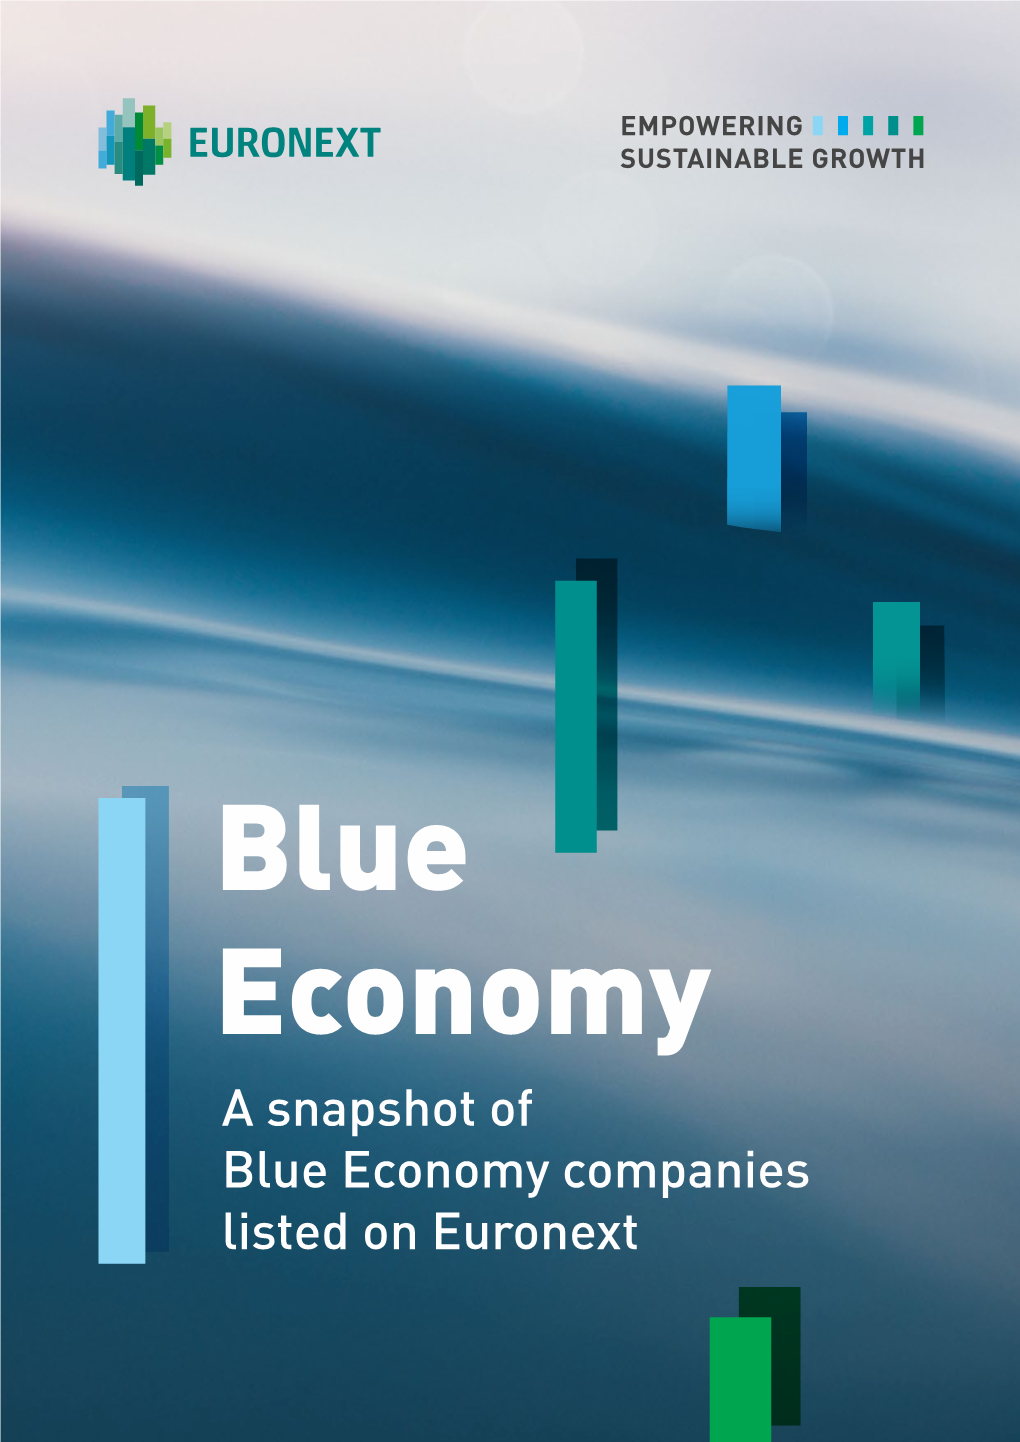 A Snapshot of Blue Economy Companies Listed on Euronext 2 | BLUE ECONOMY